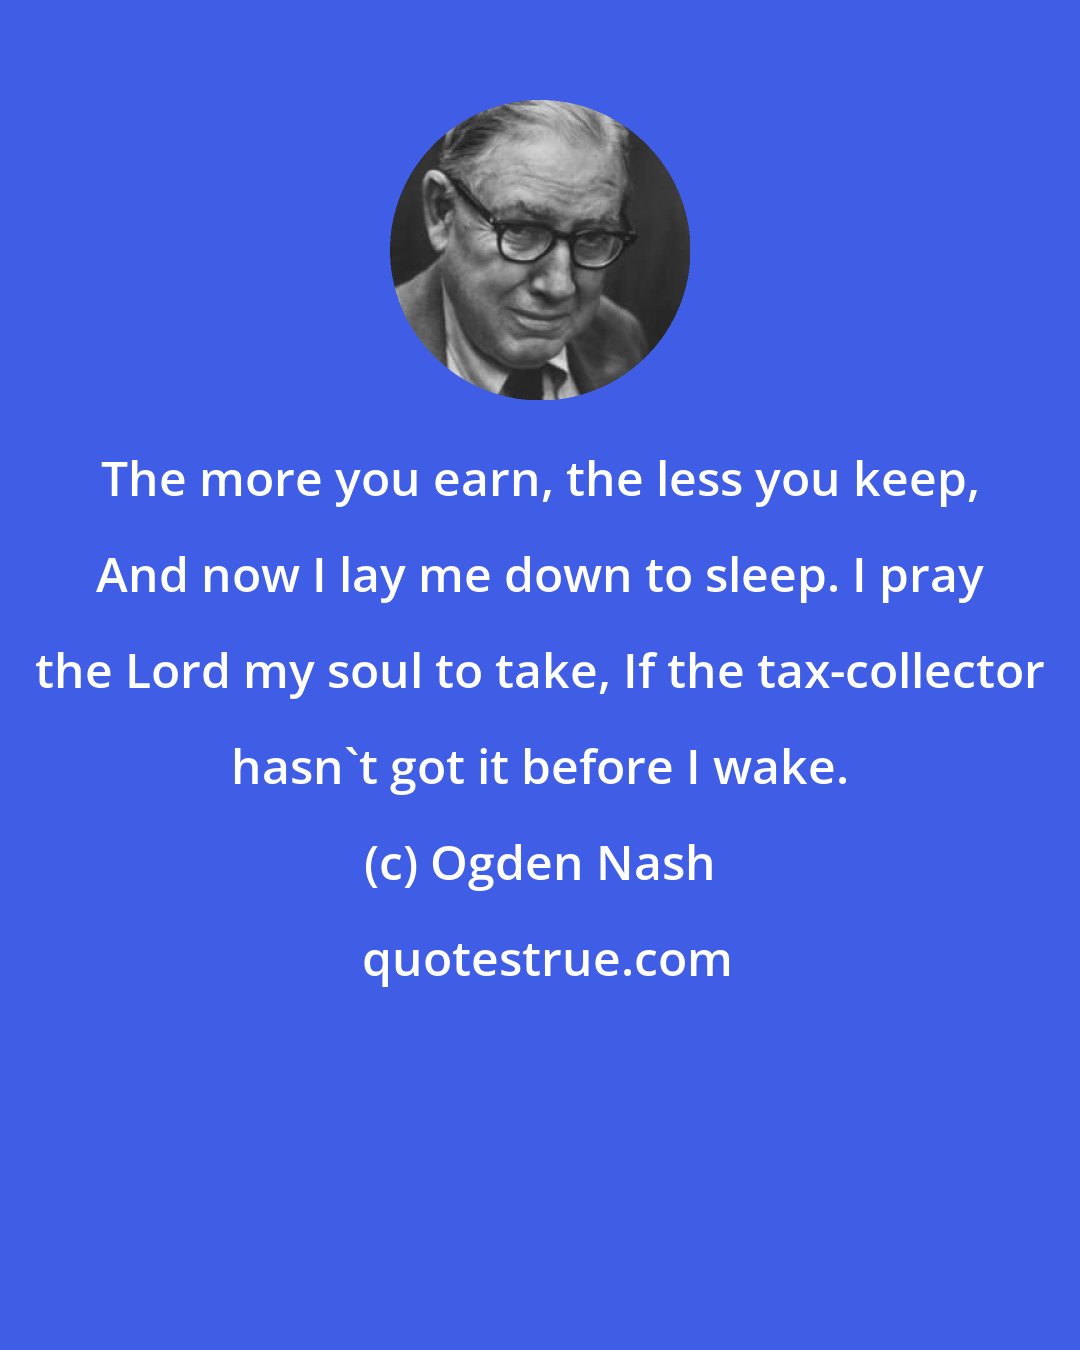 Ogden Nash: The more you earn, the less you keep, And now I lay me down to sleep. I pray the Lord my soul to take, If the tax-collector hasn't got it before I wake.